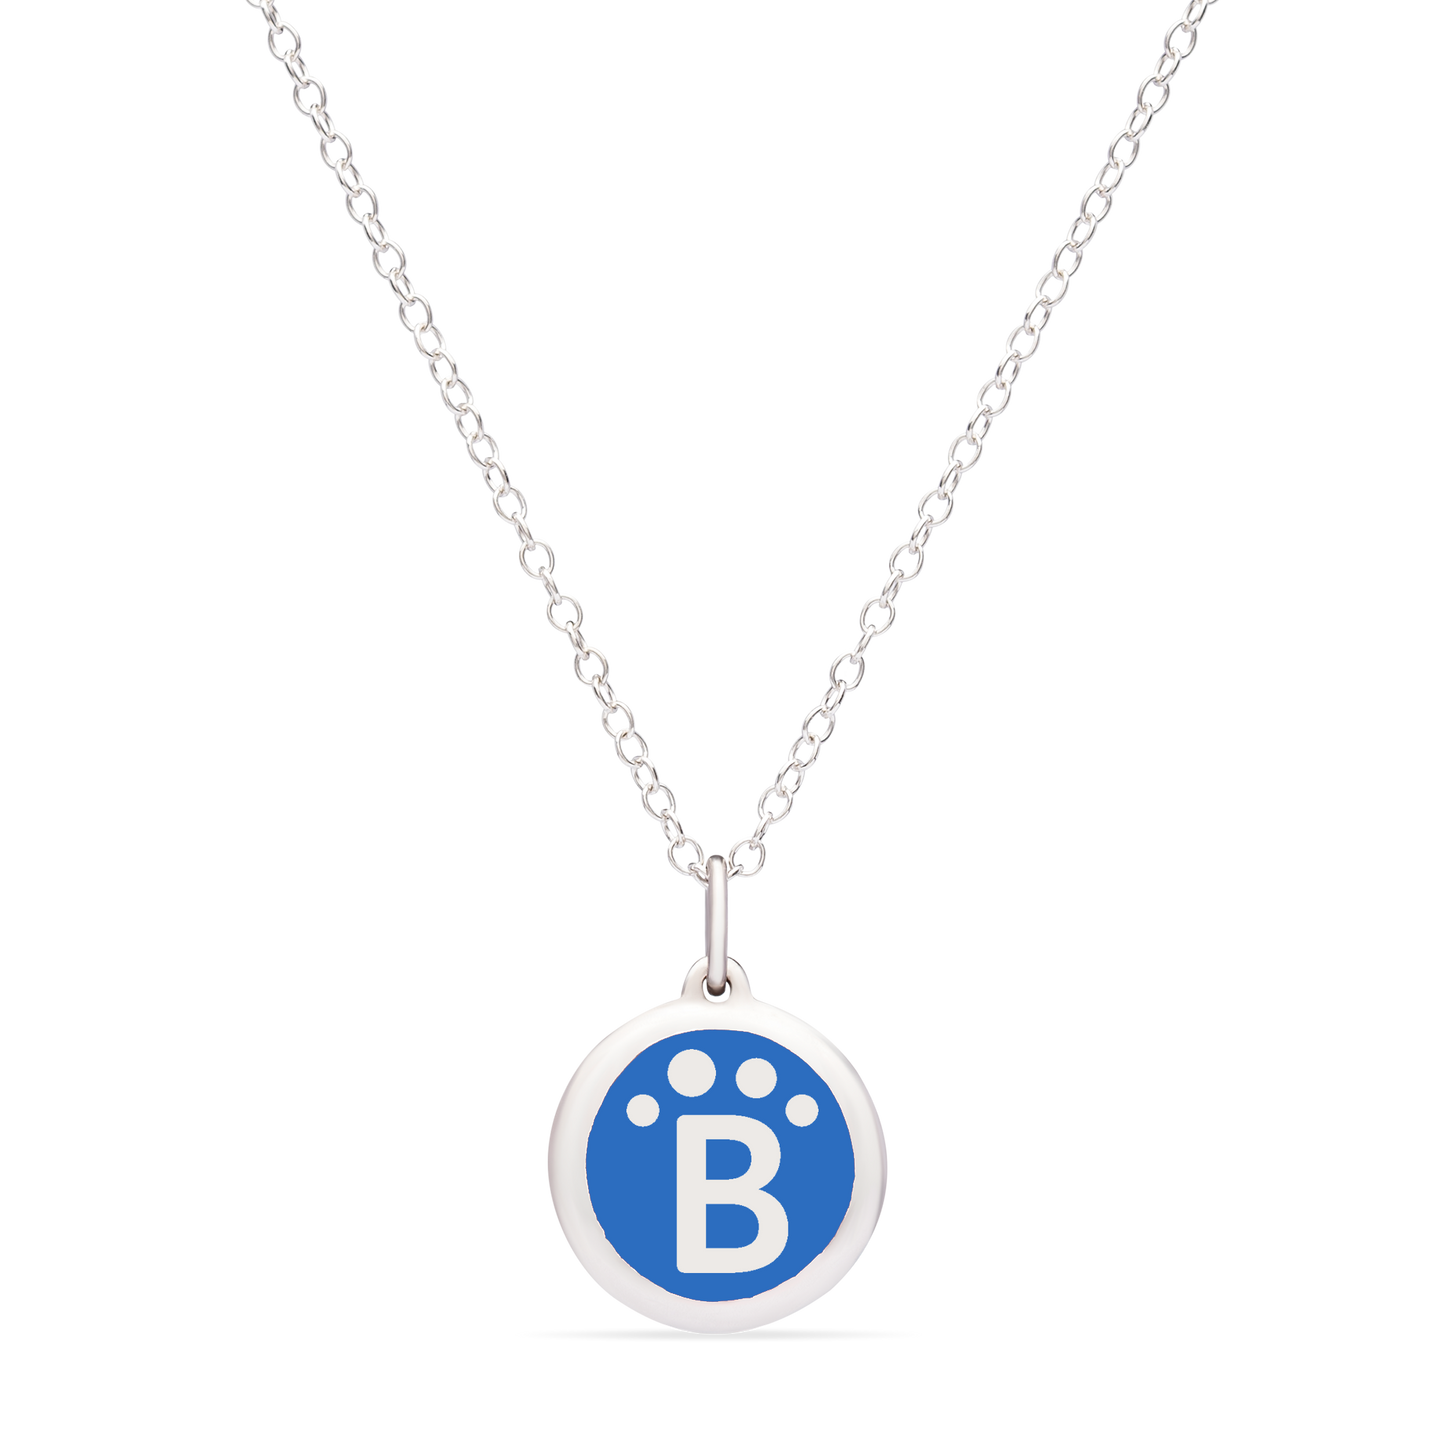 MINI BLUEPATH CHARM sterling silver with rhodium plate